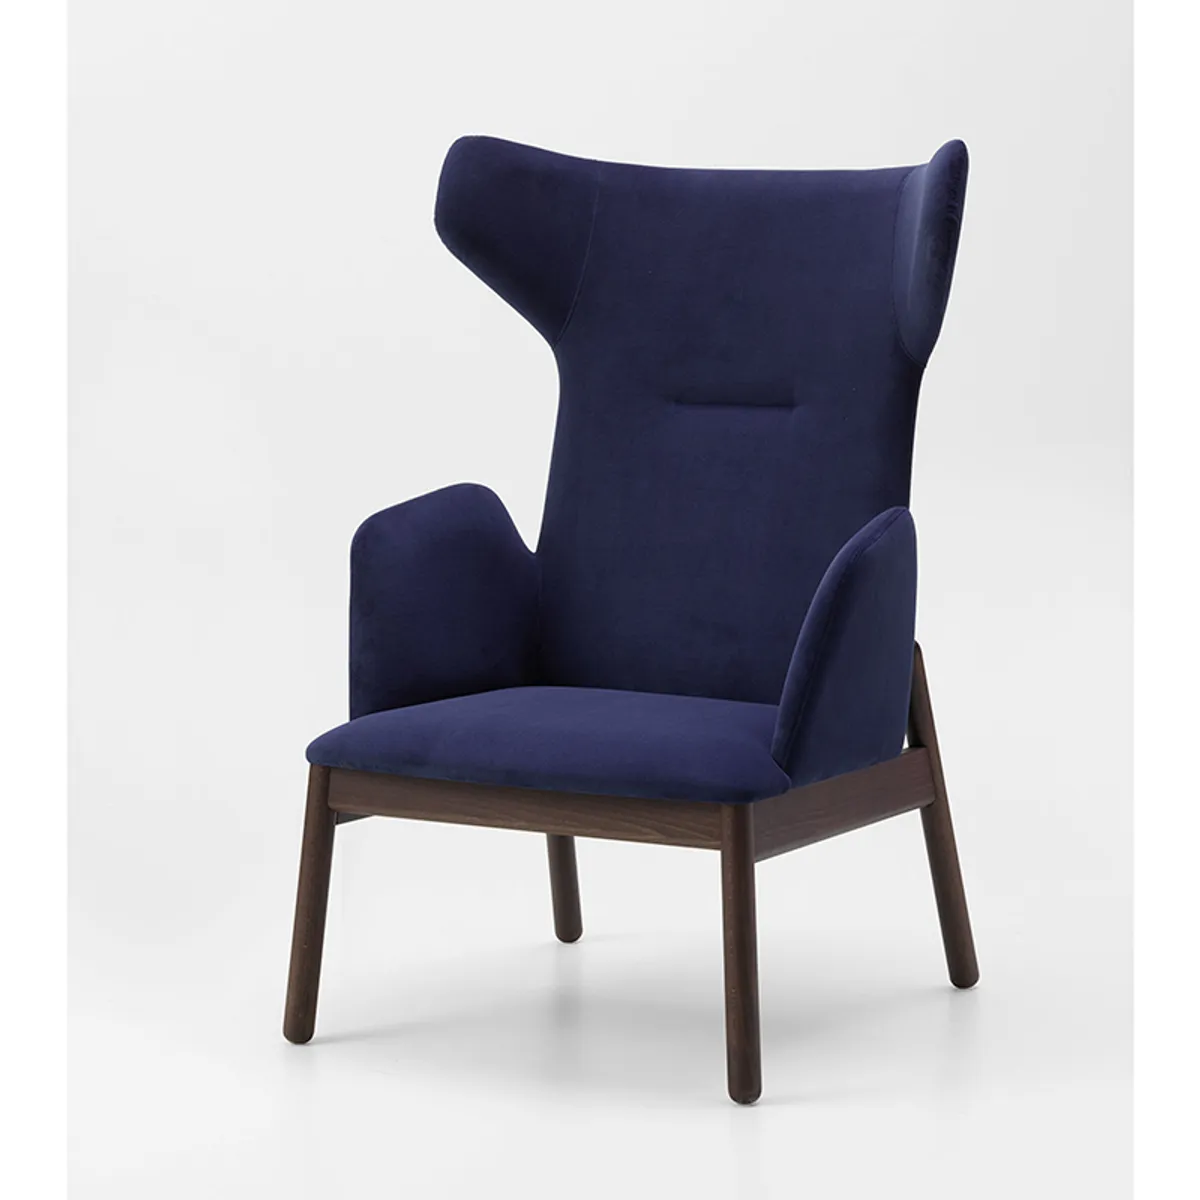 Norma Wing Back Chair P 03 0 Inside Out Contracts